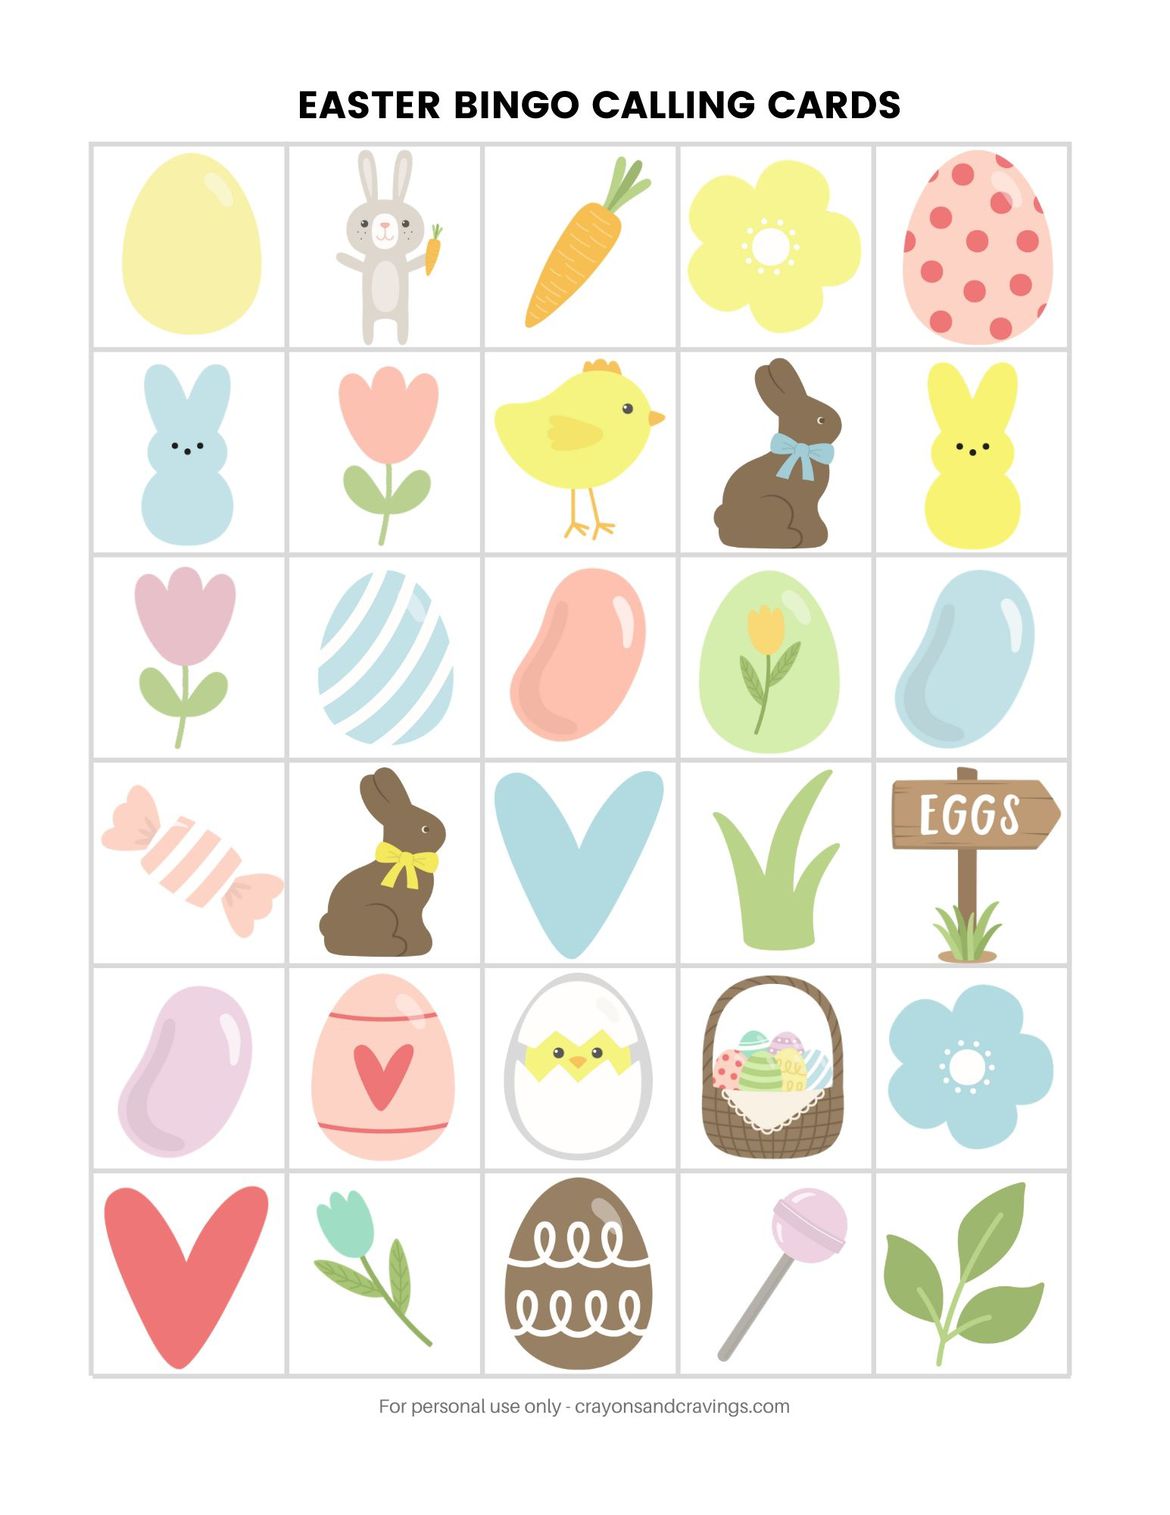 Calling Cards for Easter BINGO.